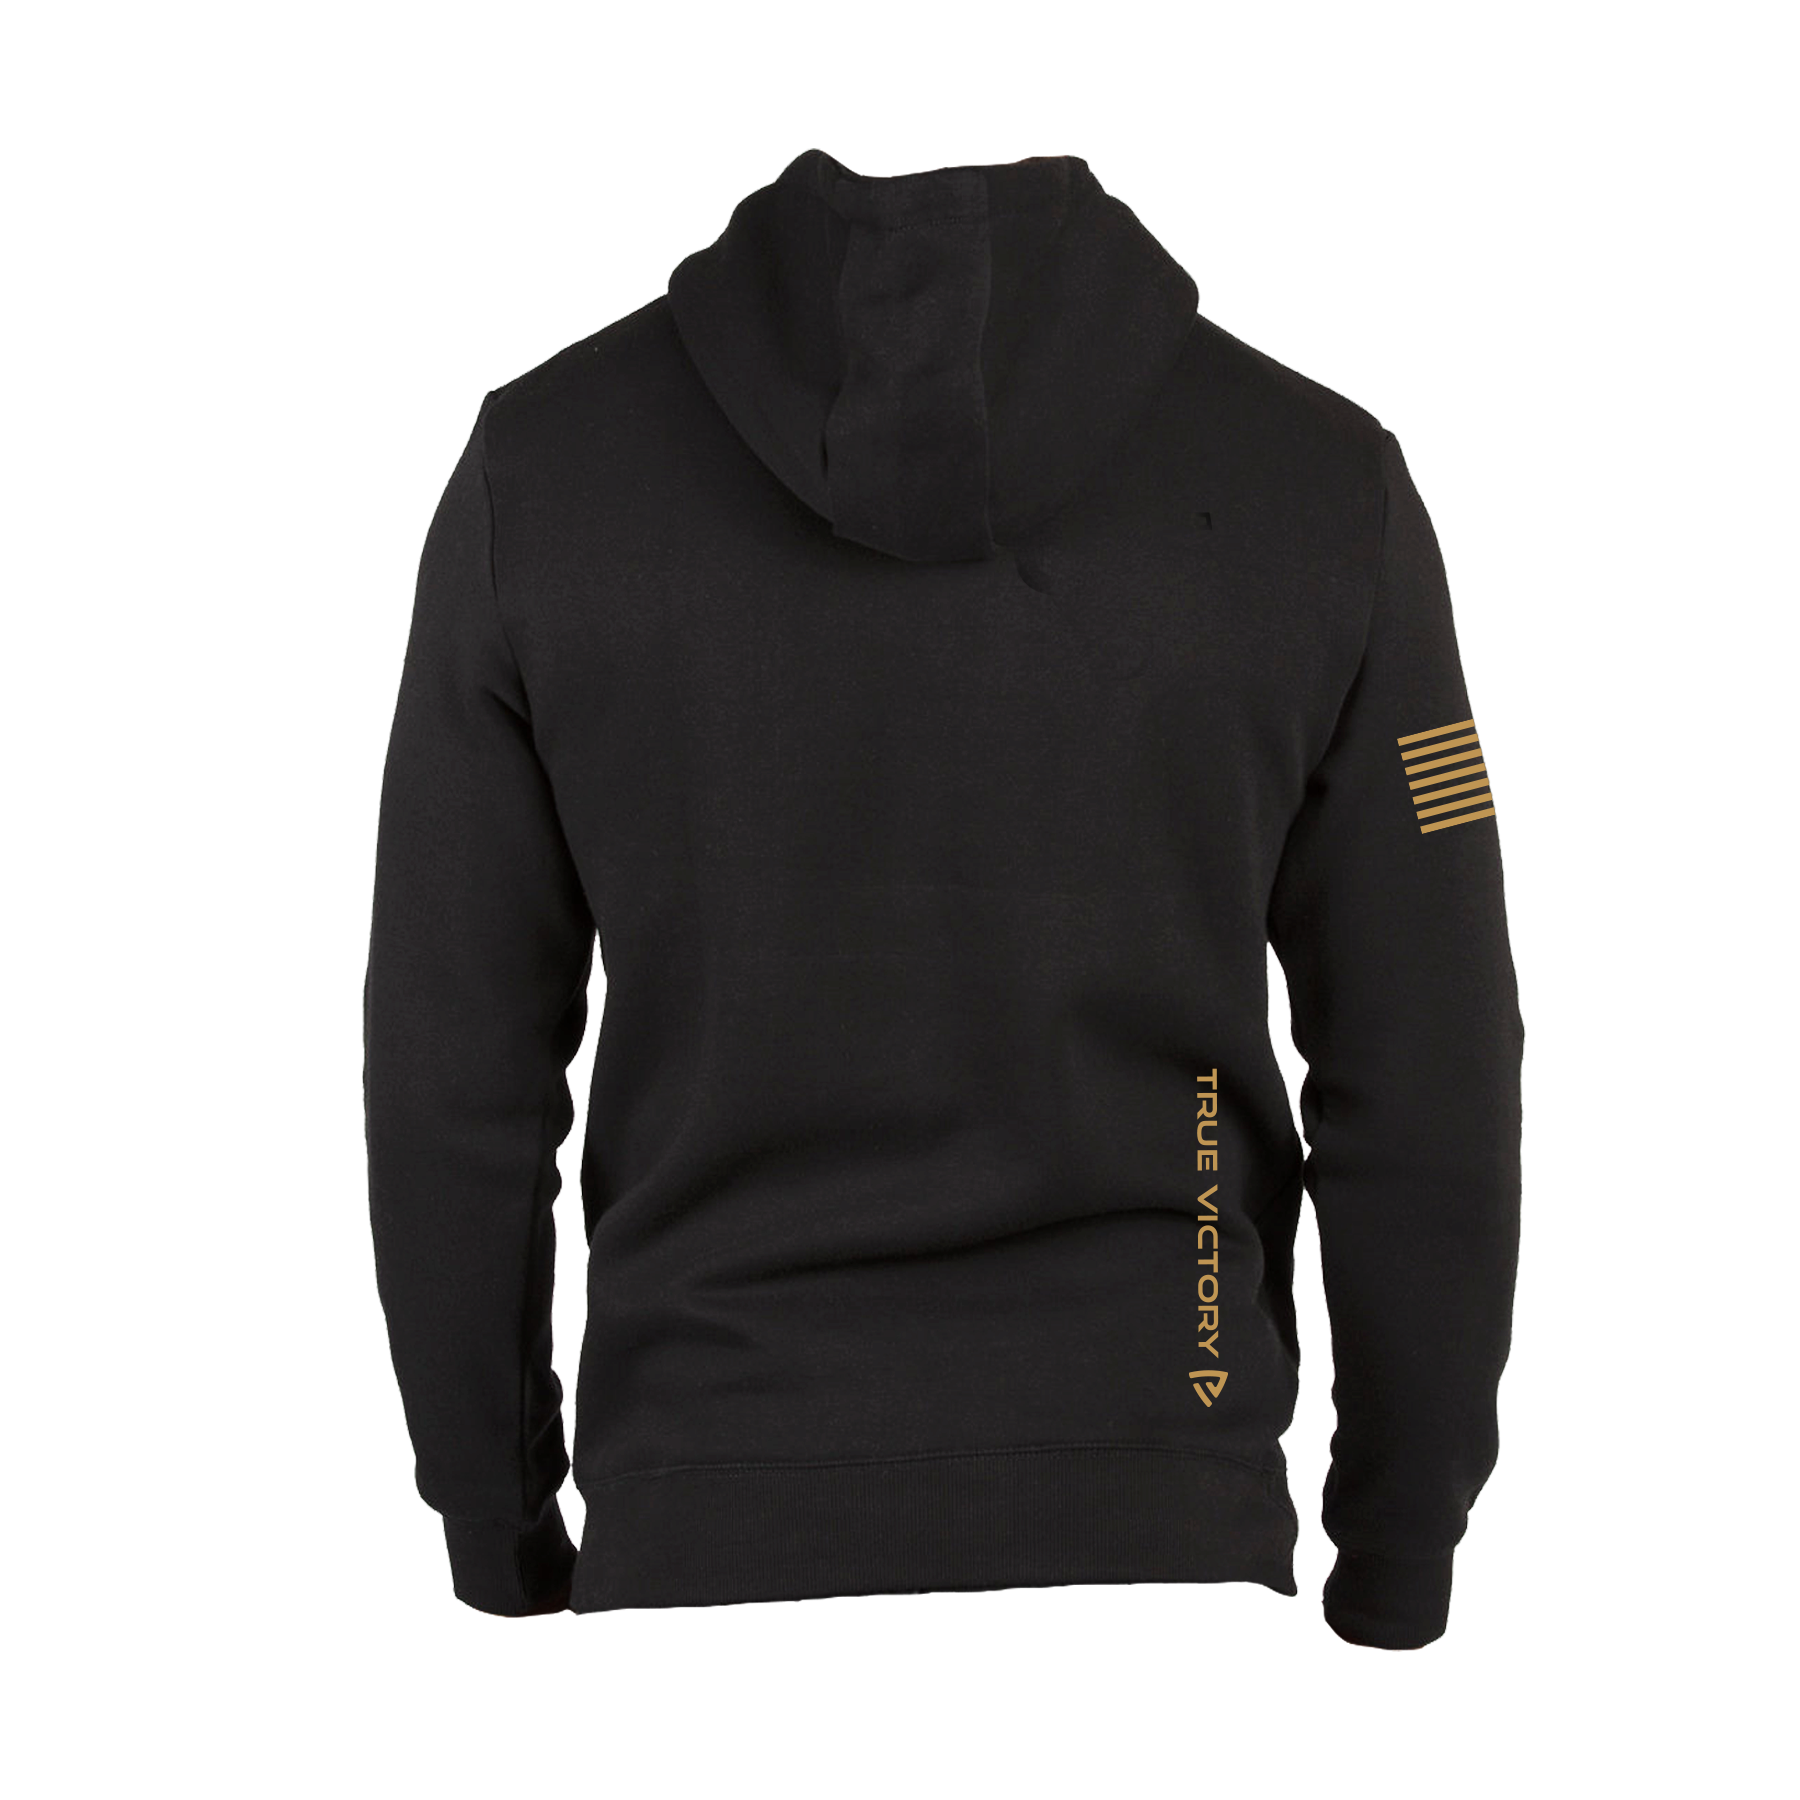 Women's Victorious x Cole Russo Signature Series Black Hoodie